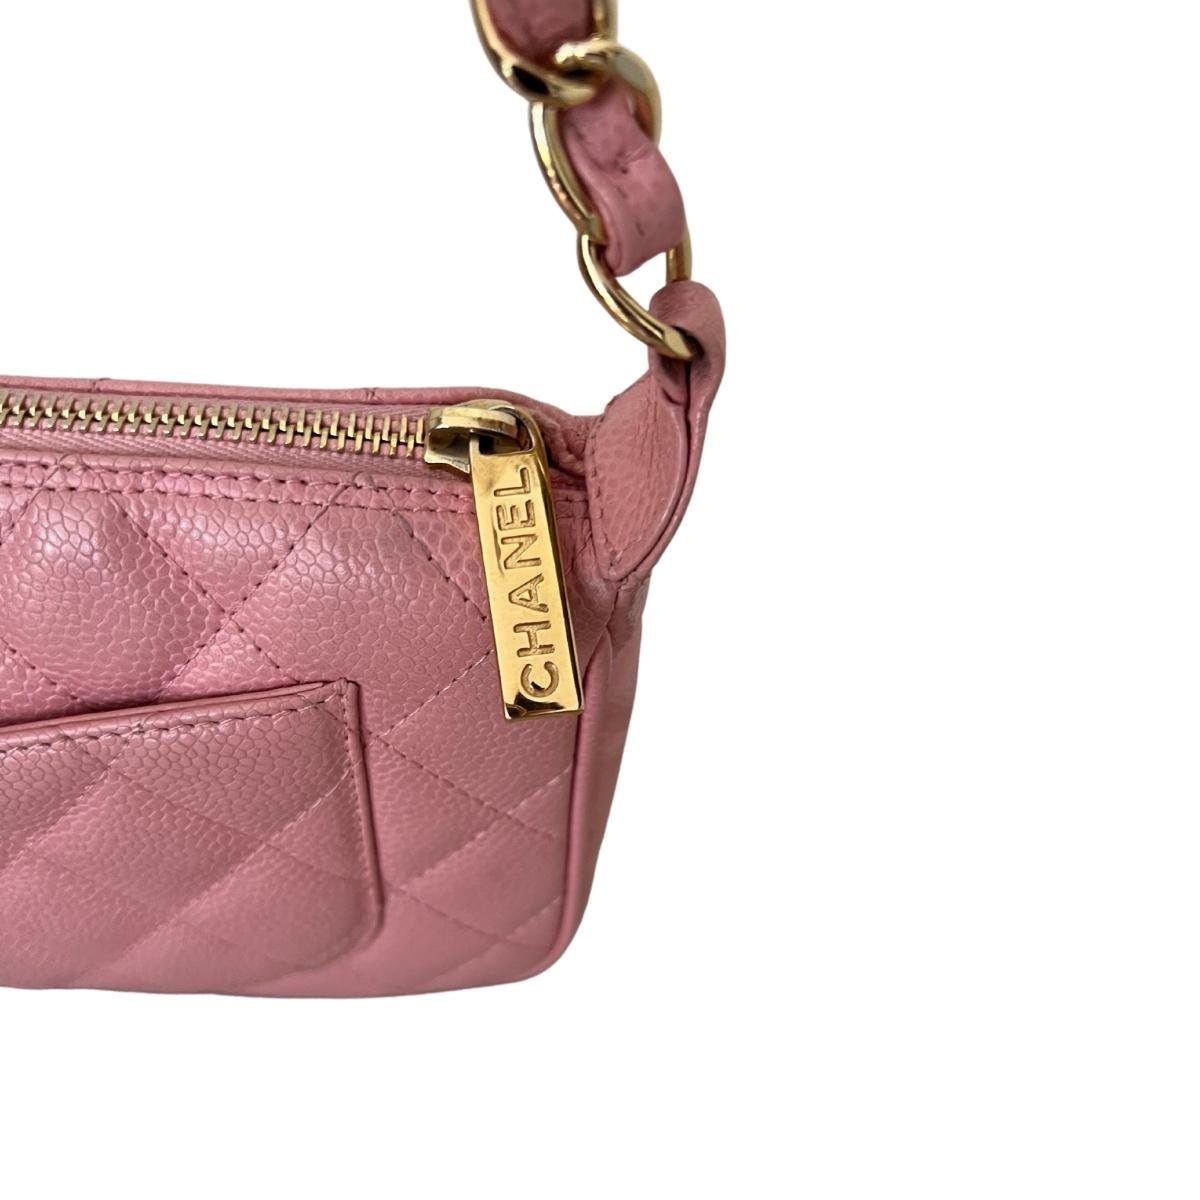 Timeless CC Chain Shoulder Bag Quilted Caviar Small